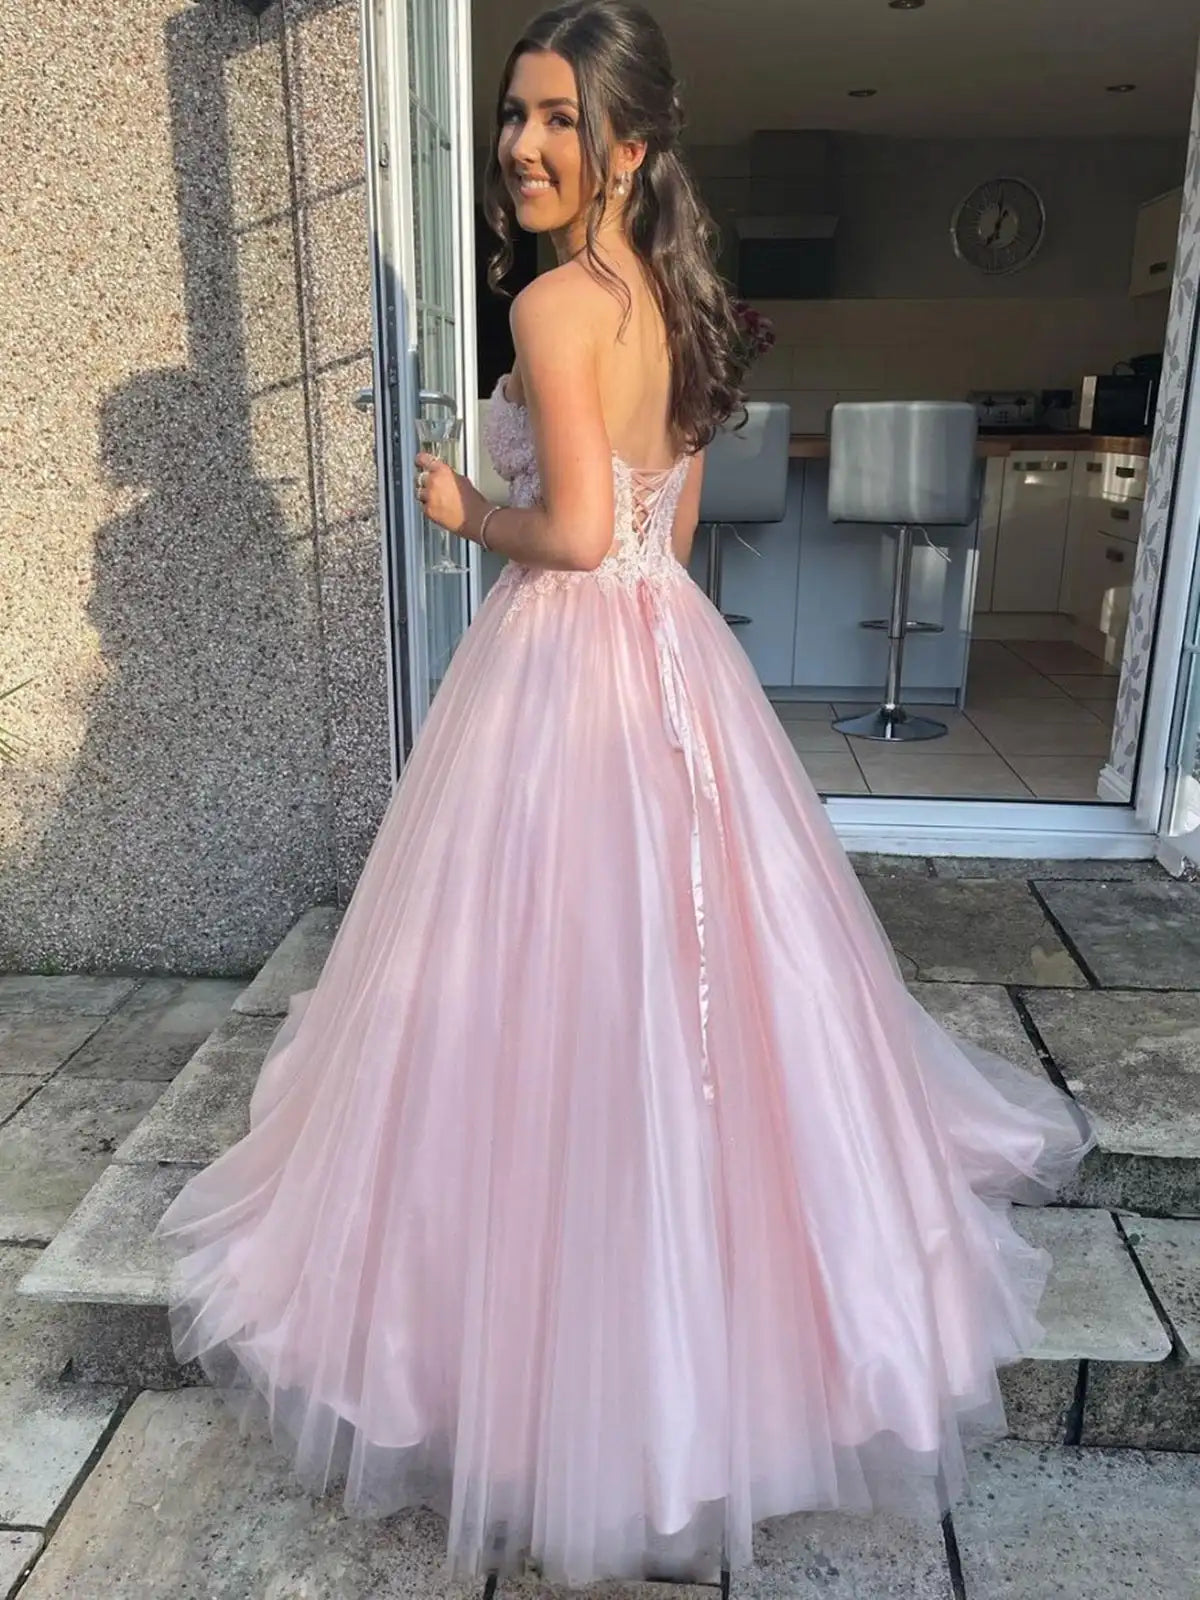 Lace Prom Dresses Tulle Pink Sweetheart Strapless Ball Gown Elegant Strapless Women Graduation Evening Gowns Formal Party